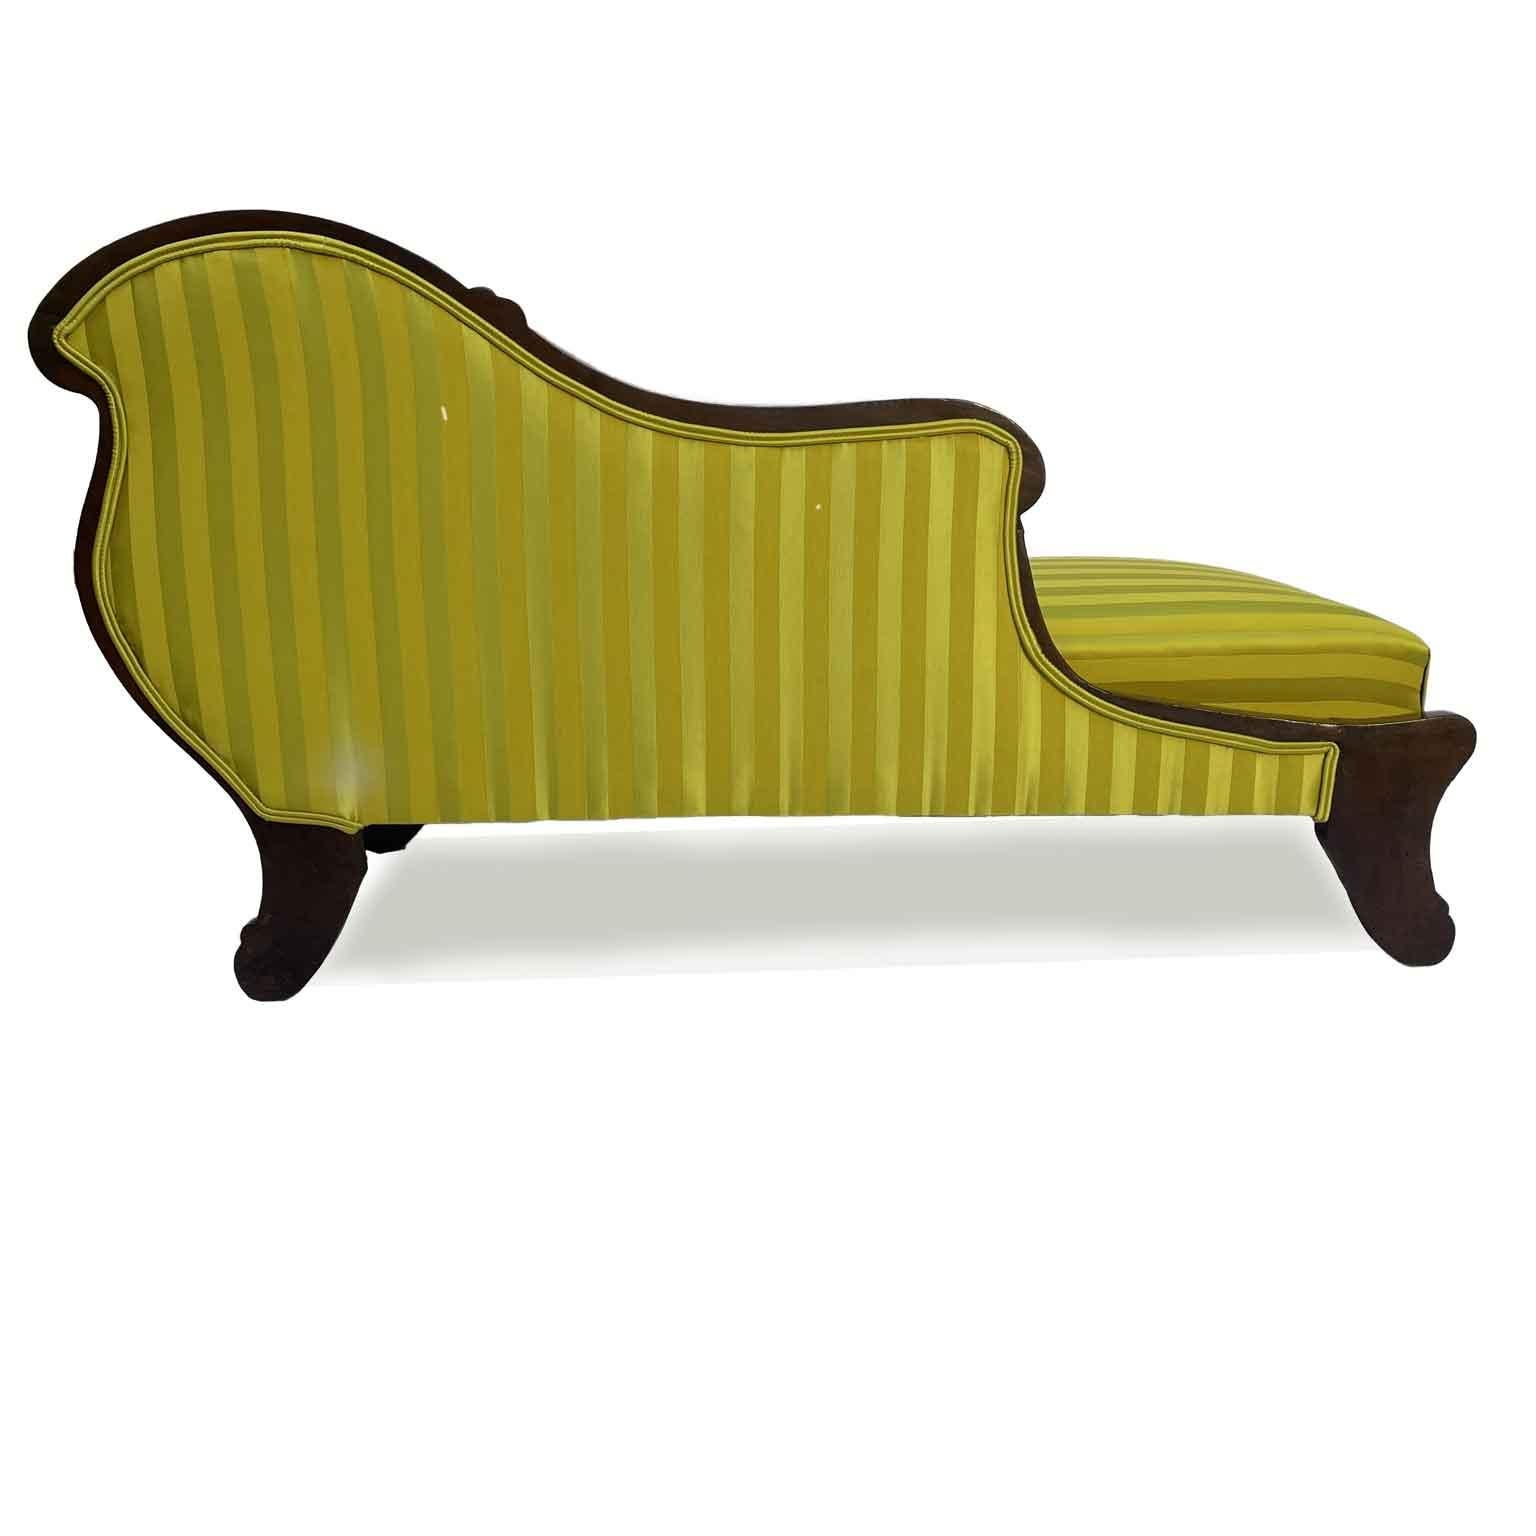 Hand-Carved Italian Center Dormeuse in Carved Walnut circa 1850 Yellow Fabric For Sale